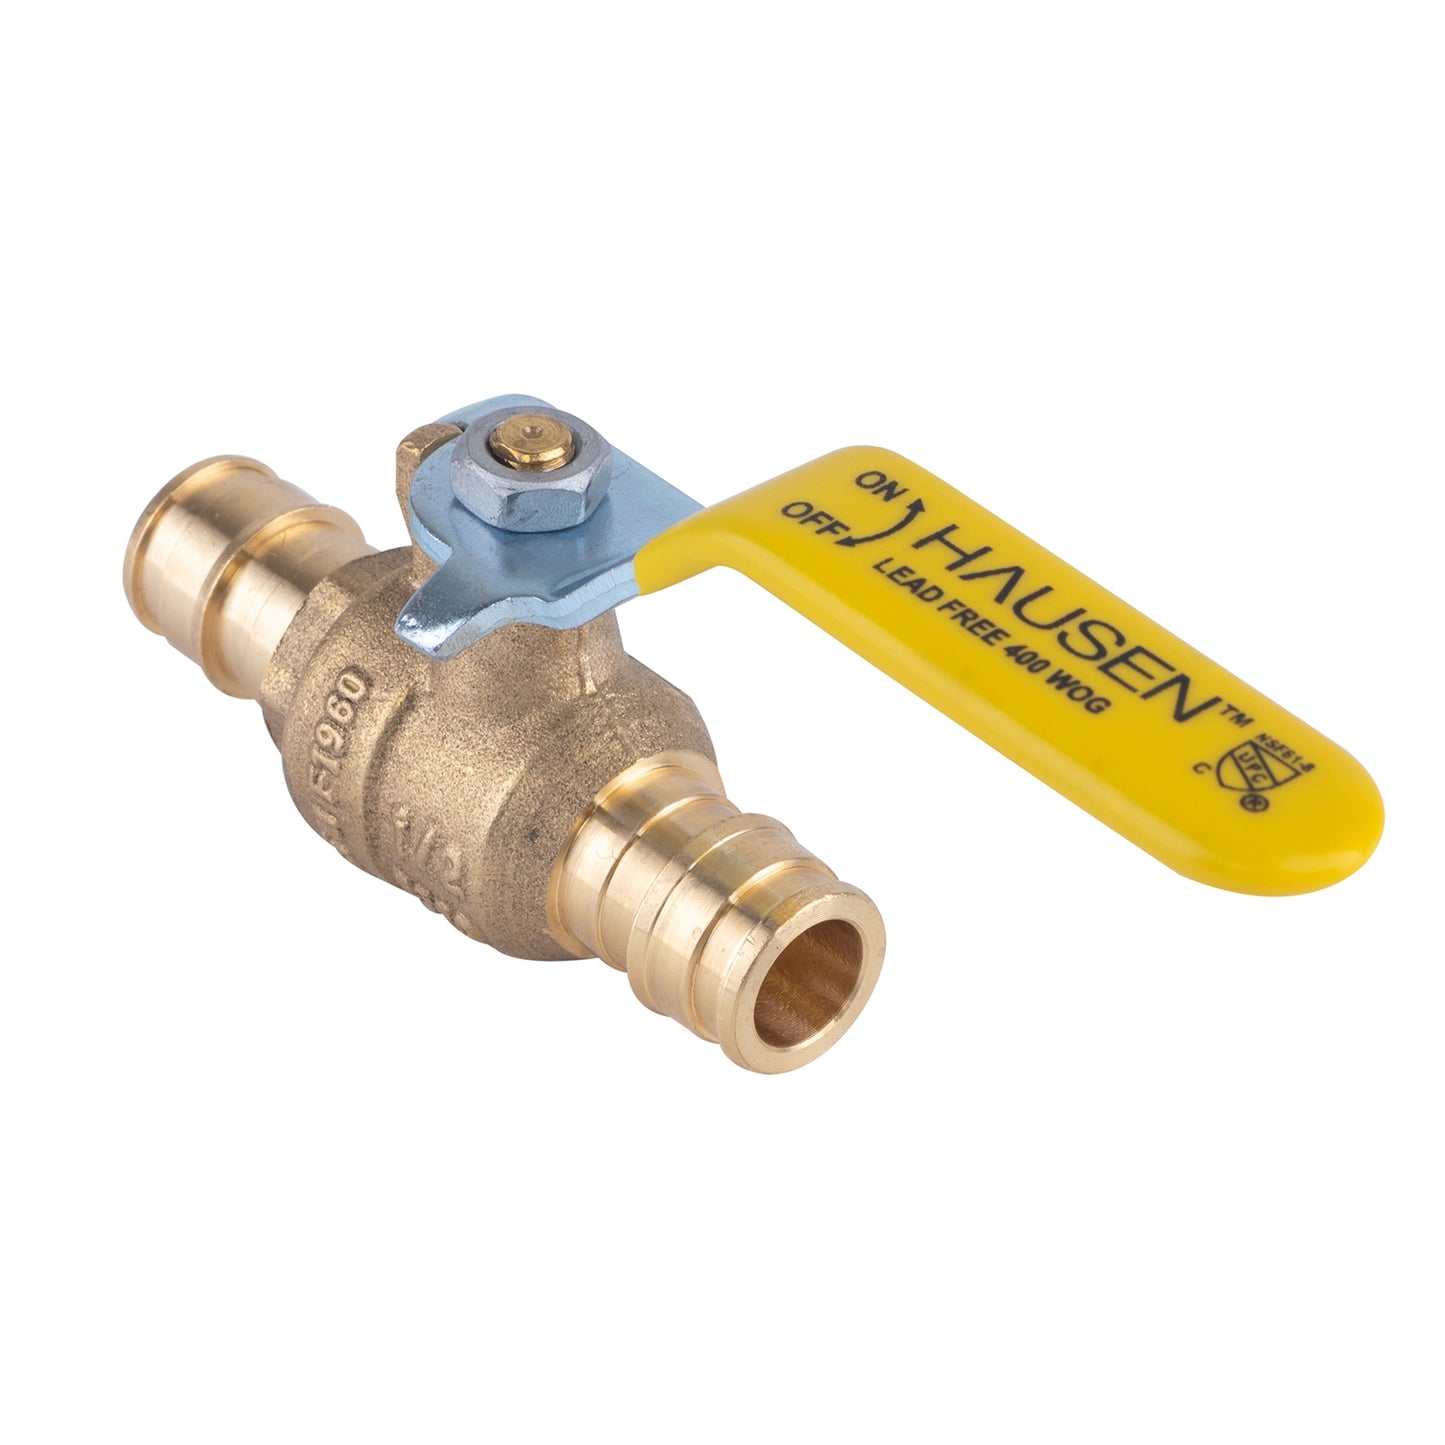 Hausen 1/2-inch PEX Standard Port Brass Ball Valve with PEX Expansion Connection, 1-Pack